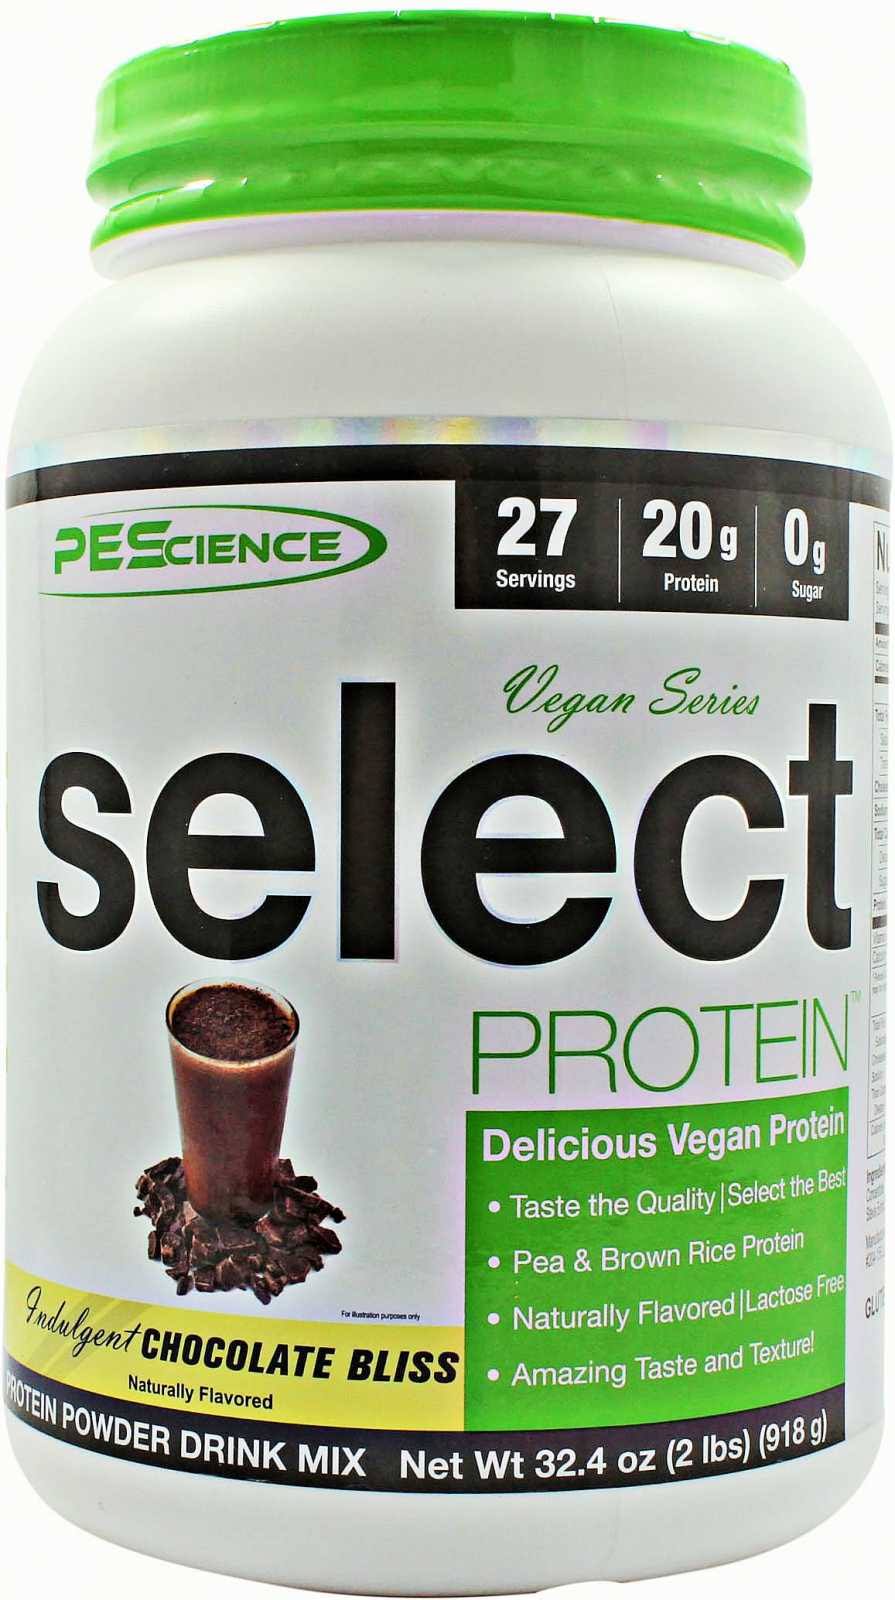 PEScience Select Protein - Indulgent Chocolate Bliss, 27 servings